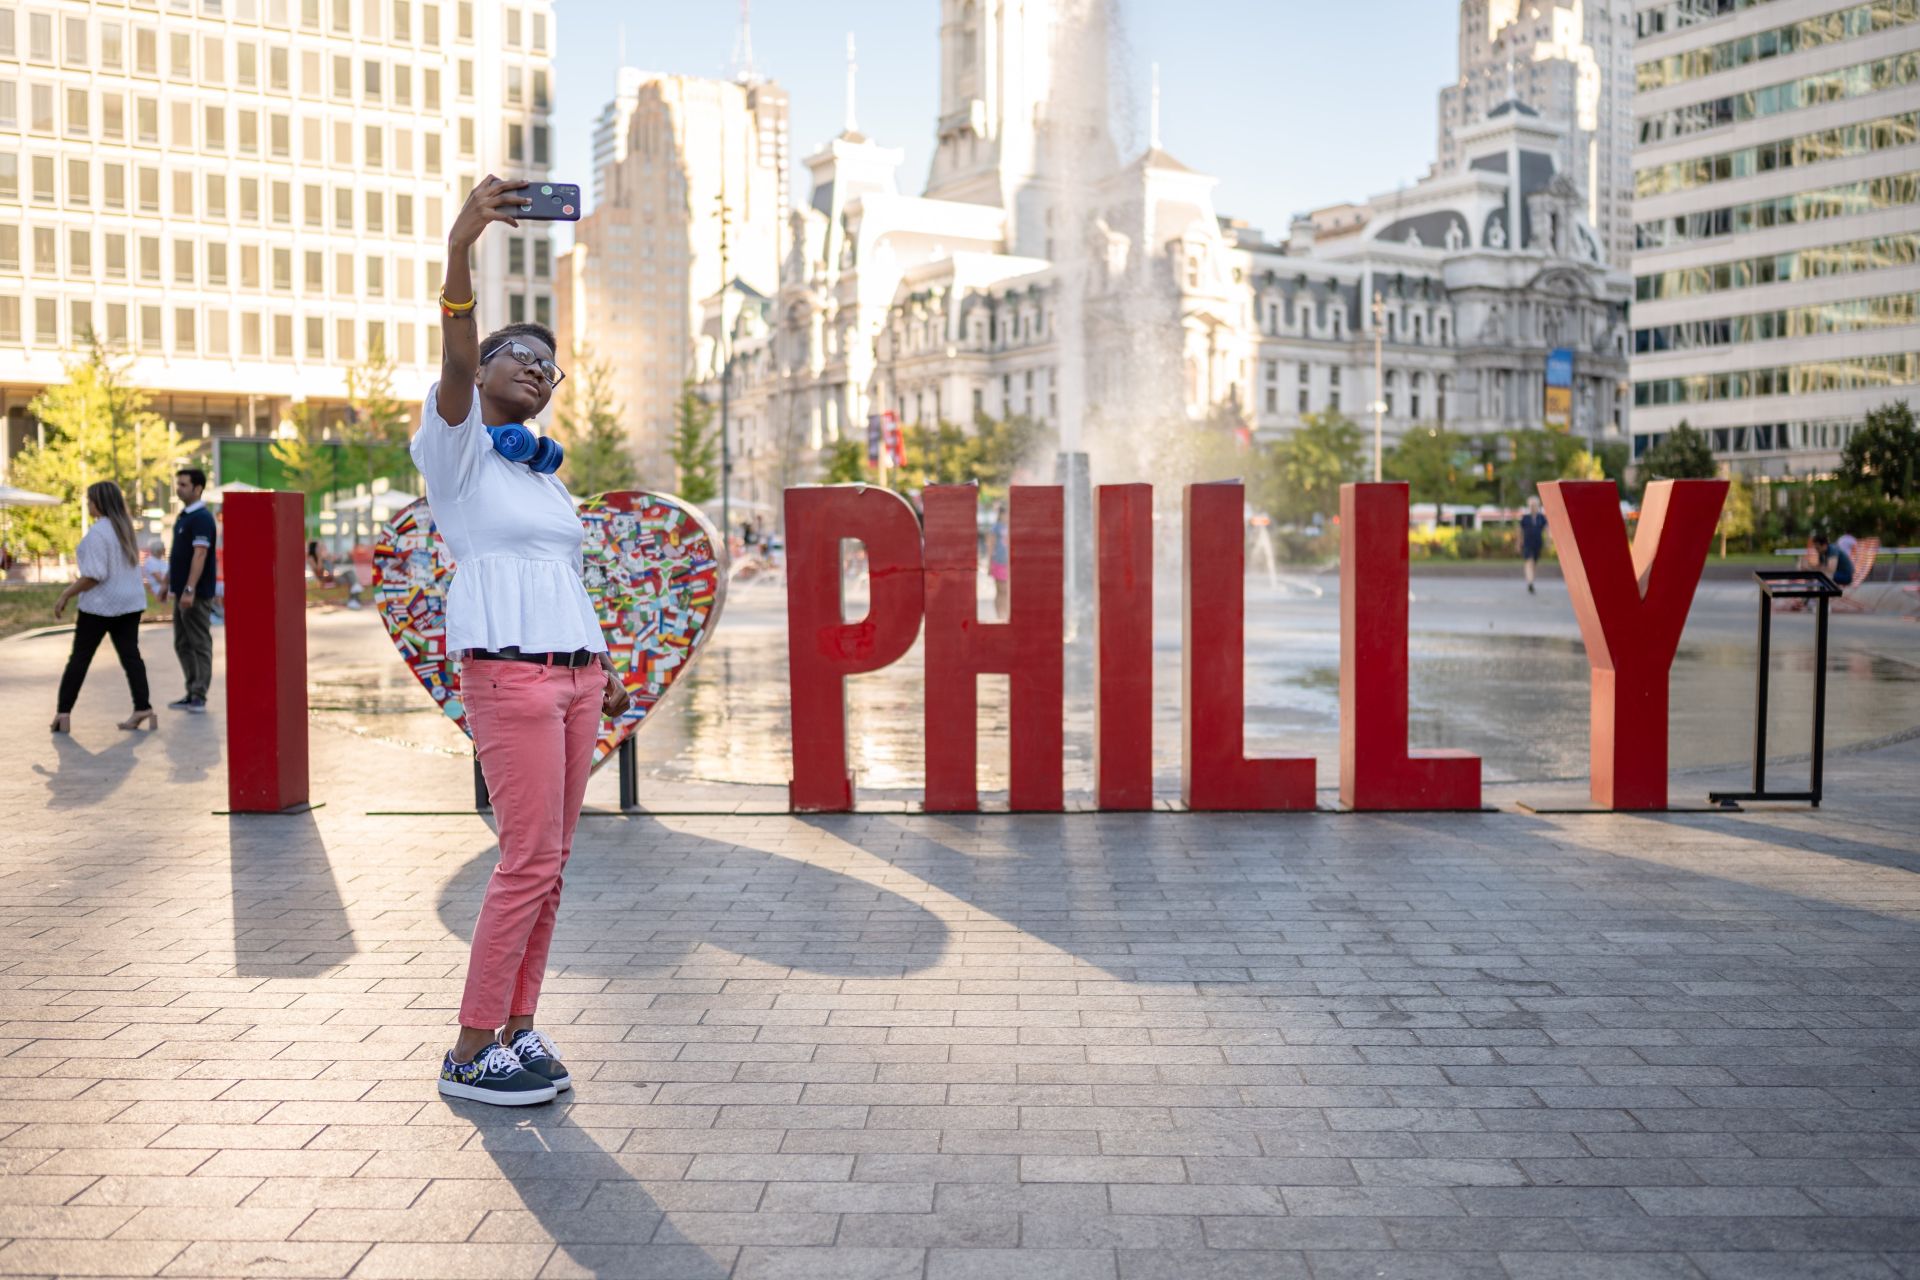 A person in white shirt and red pants taking a selfie in front of a red I "heart" philly sign